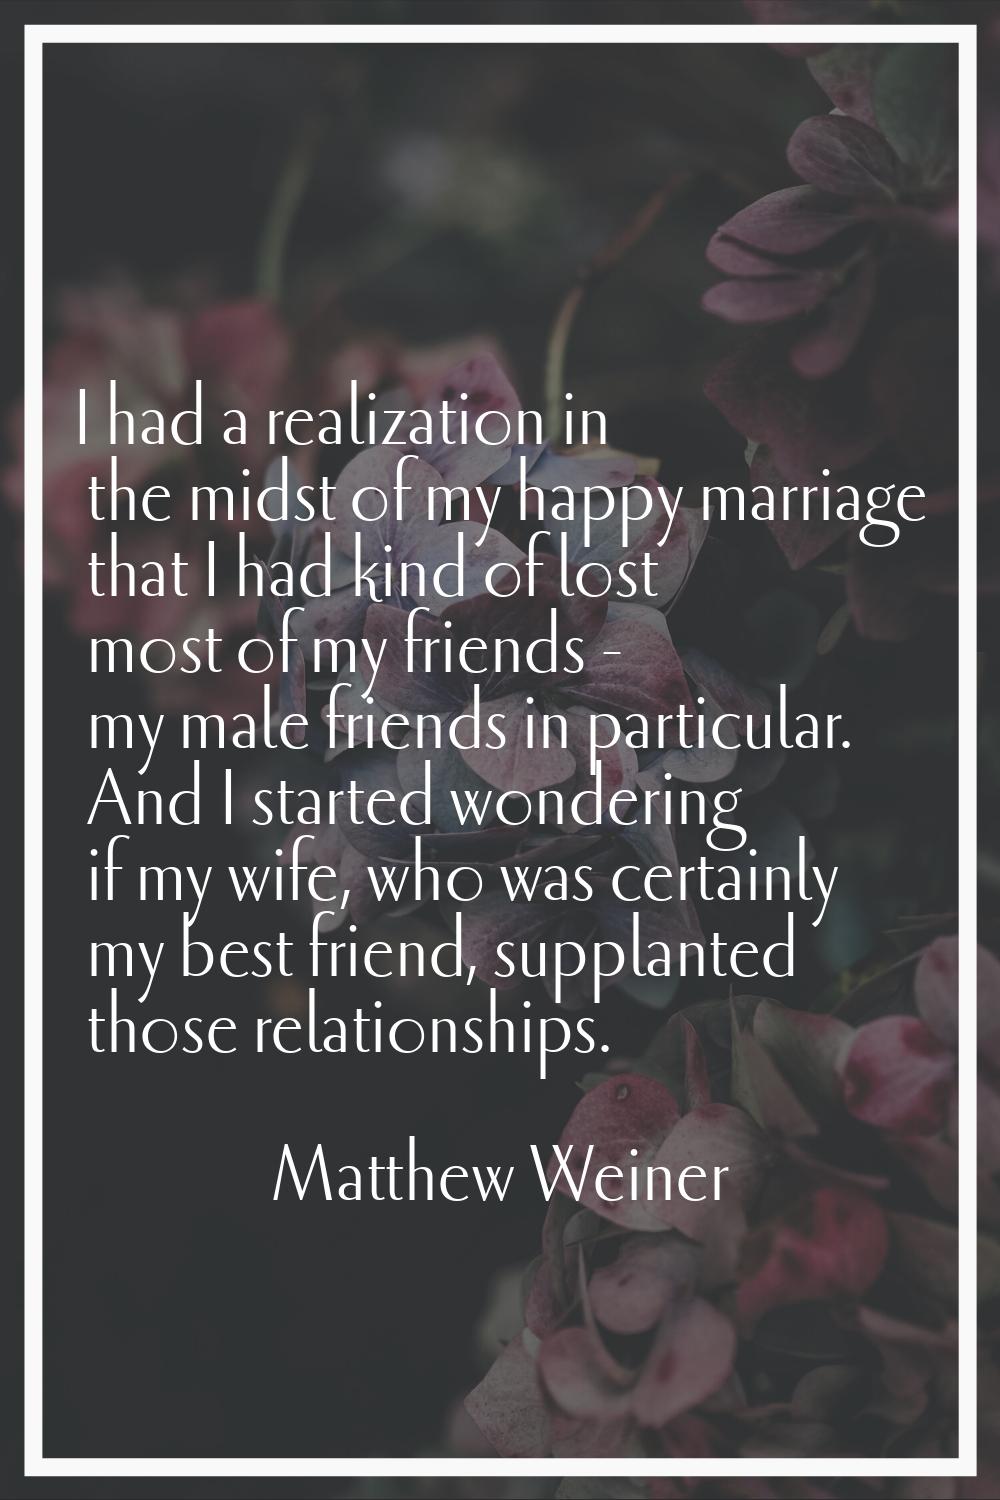 I had a realization in the midst of my happy marriage that I had kind of lost most of my friends - 